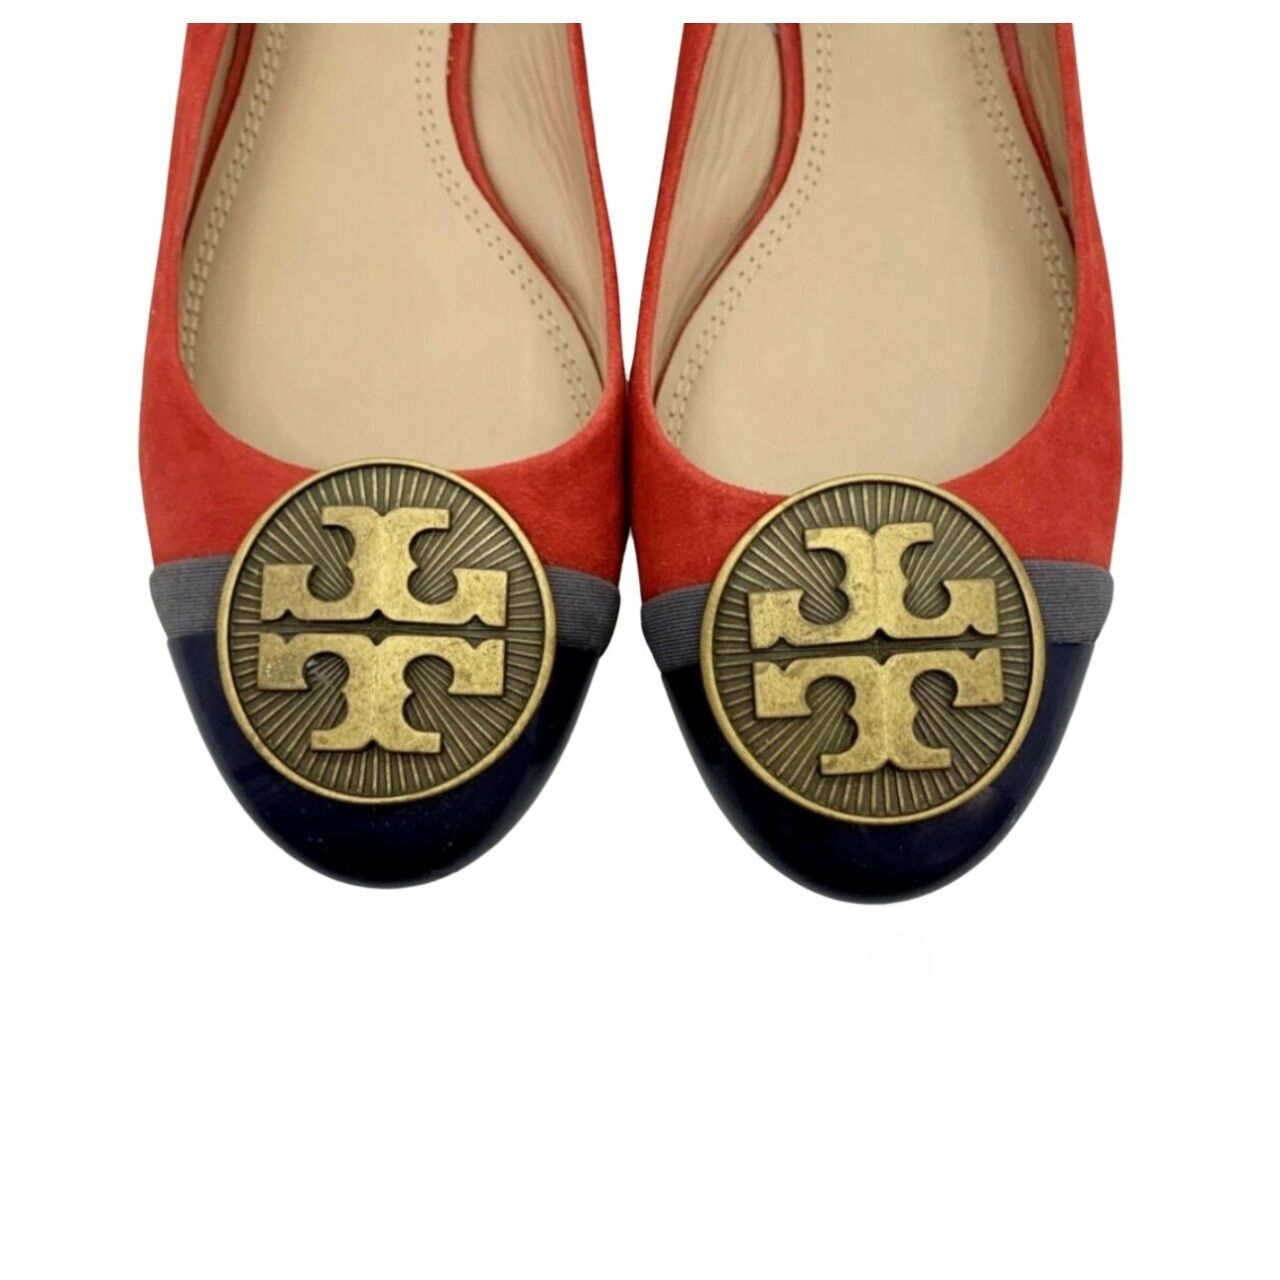 Tory Burch Red Suede Slingback Flats